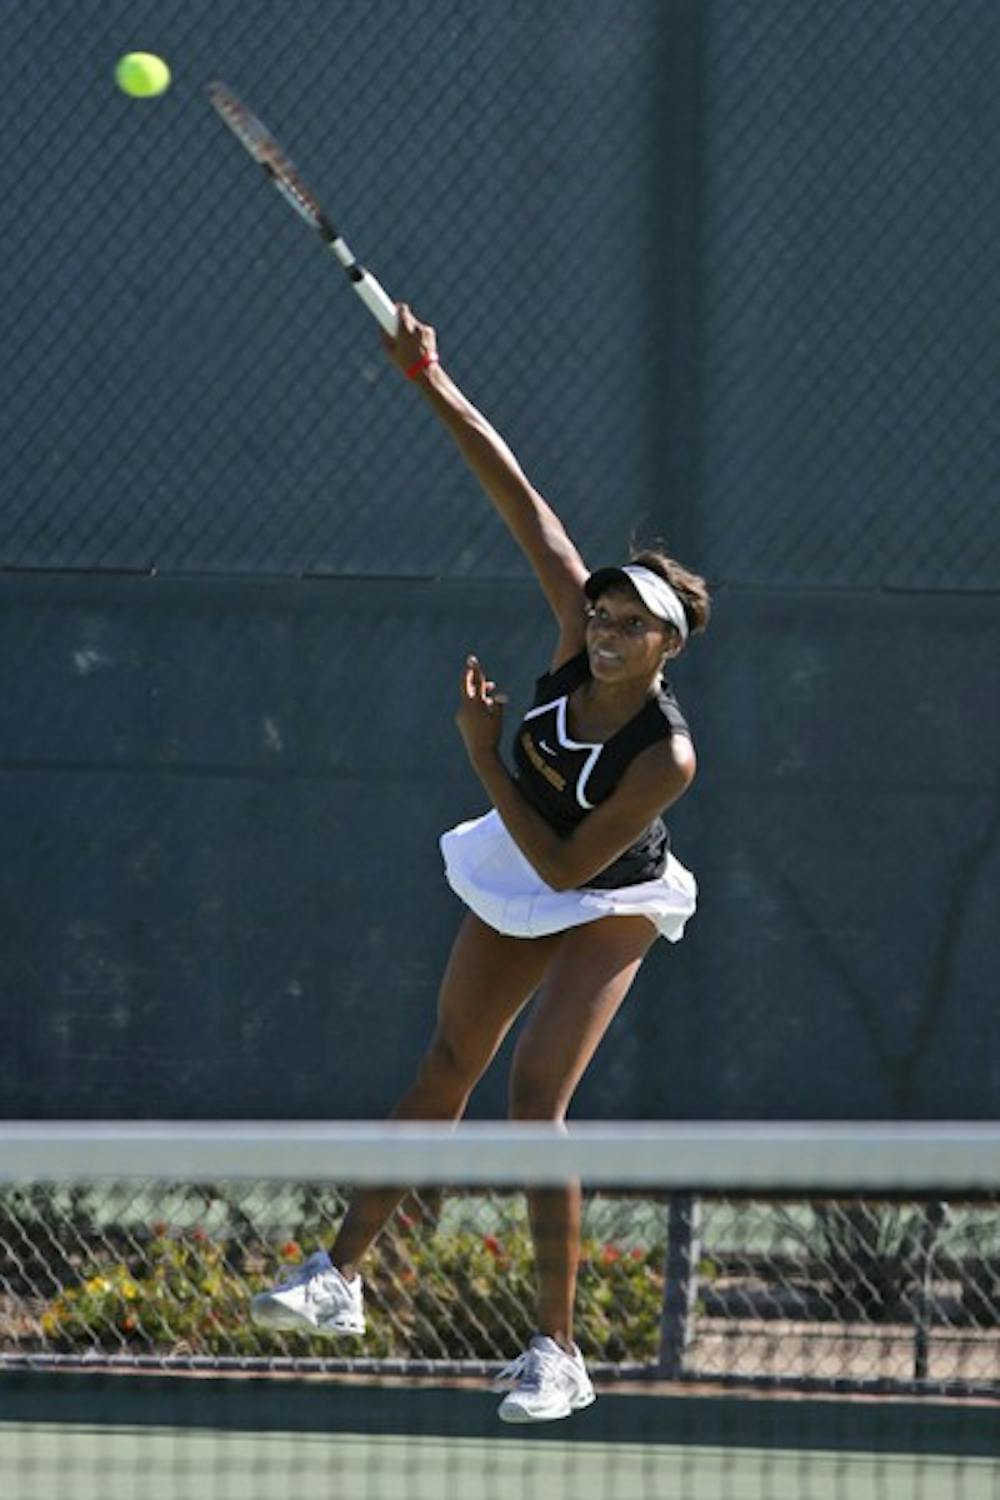 Senior Sianna Simmons follows through on a serve against Sacramento State on March 2. The Women’s tennis team faces Washington State this weekend before finishing the regular season against some of the best teams in the Pac-12. (Photo by Sam Rosenbaum)